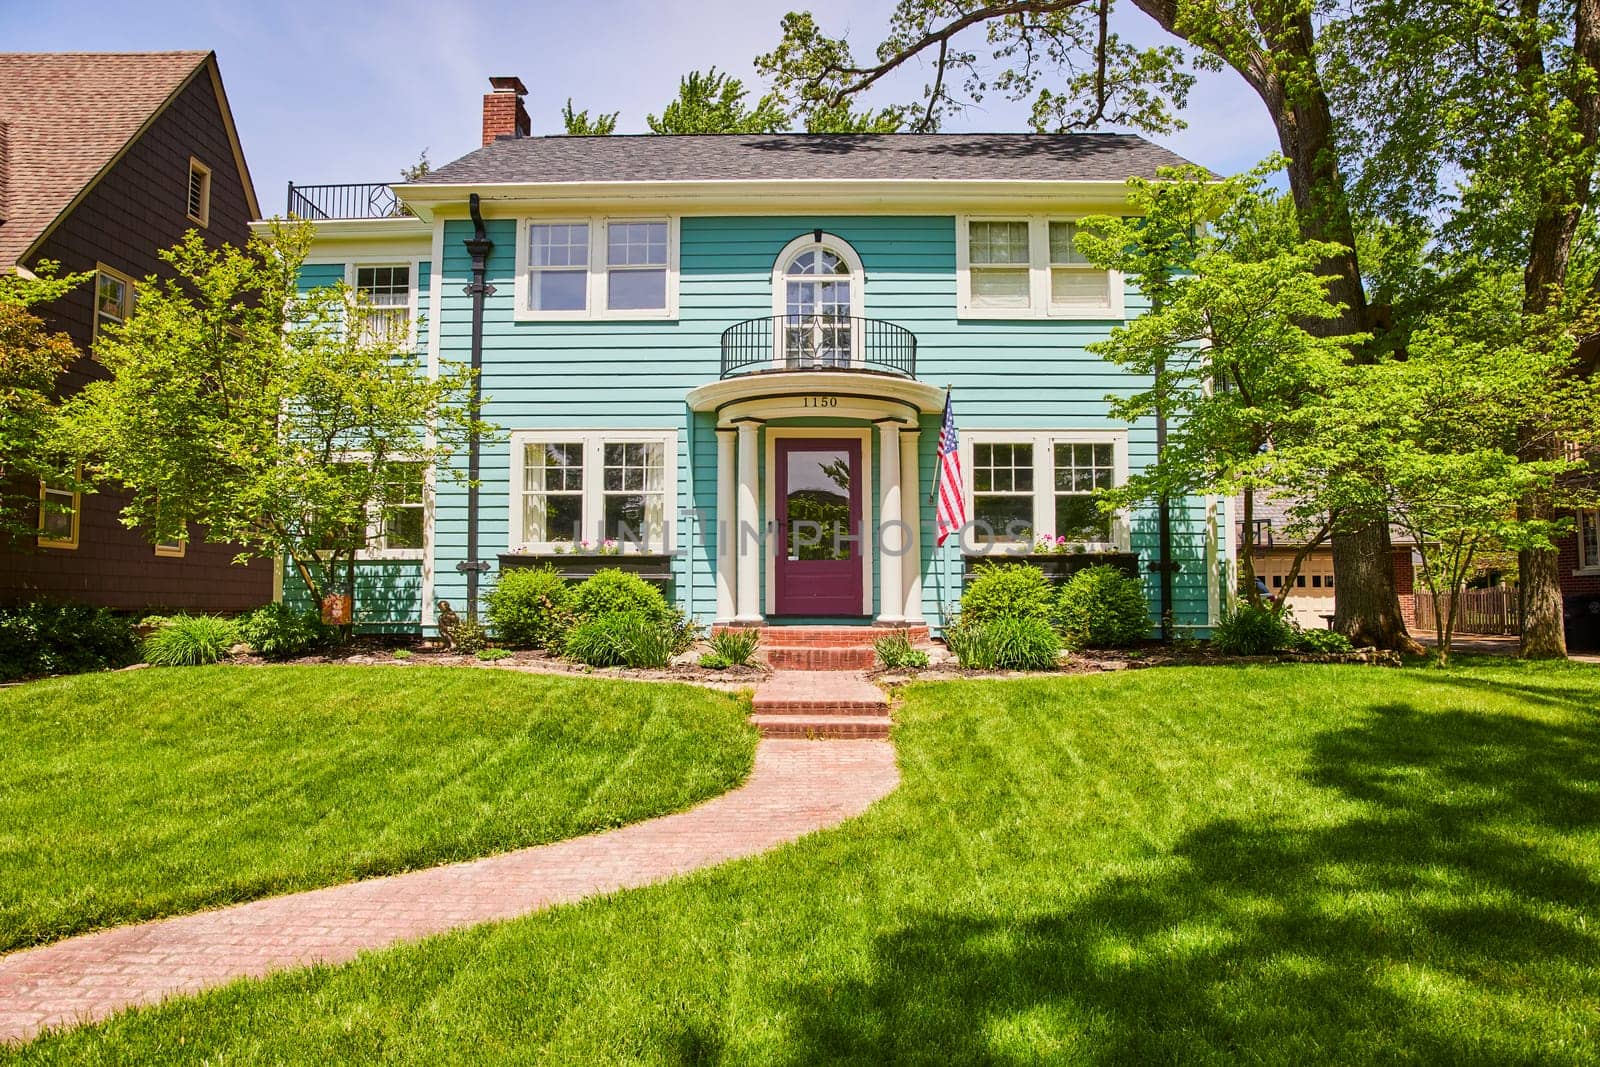 Charming turquoise home with a purple door and American flag, nestled in Fort Wayne's historic South Wayne district.